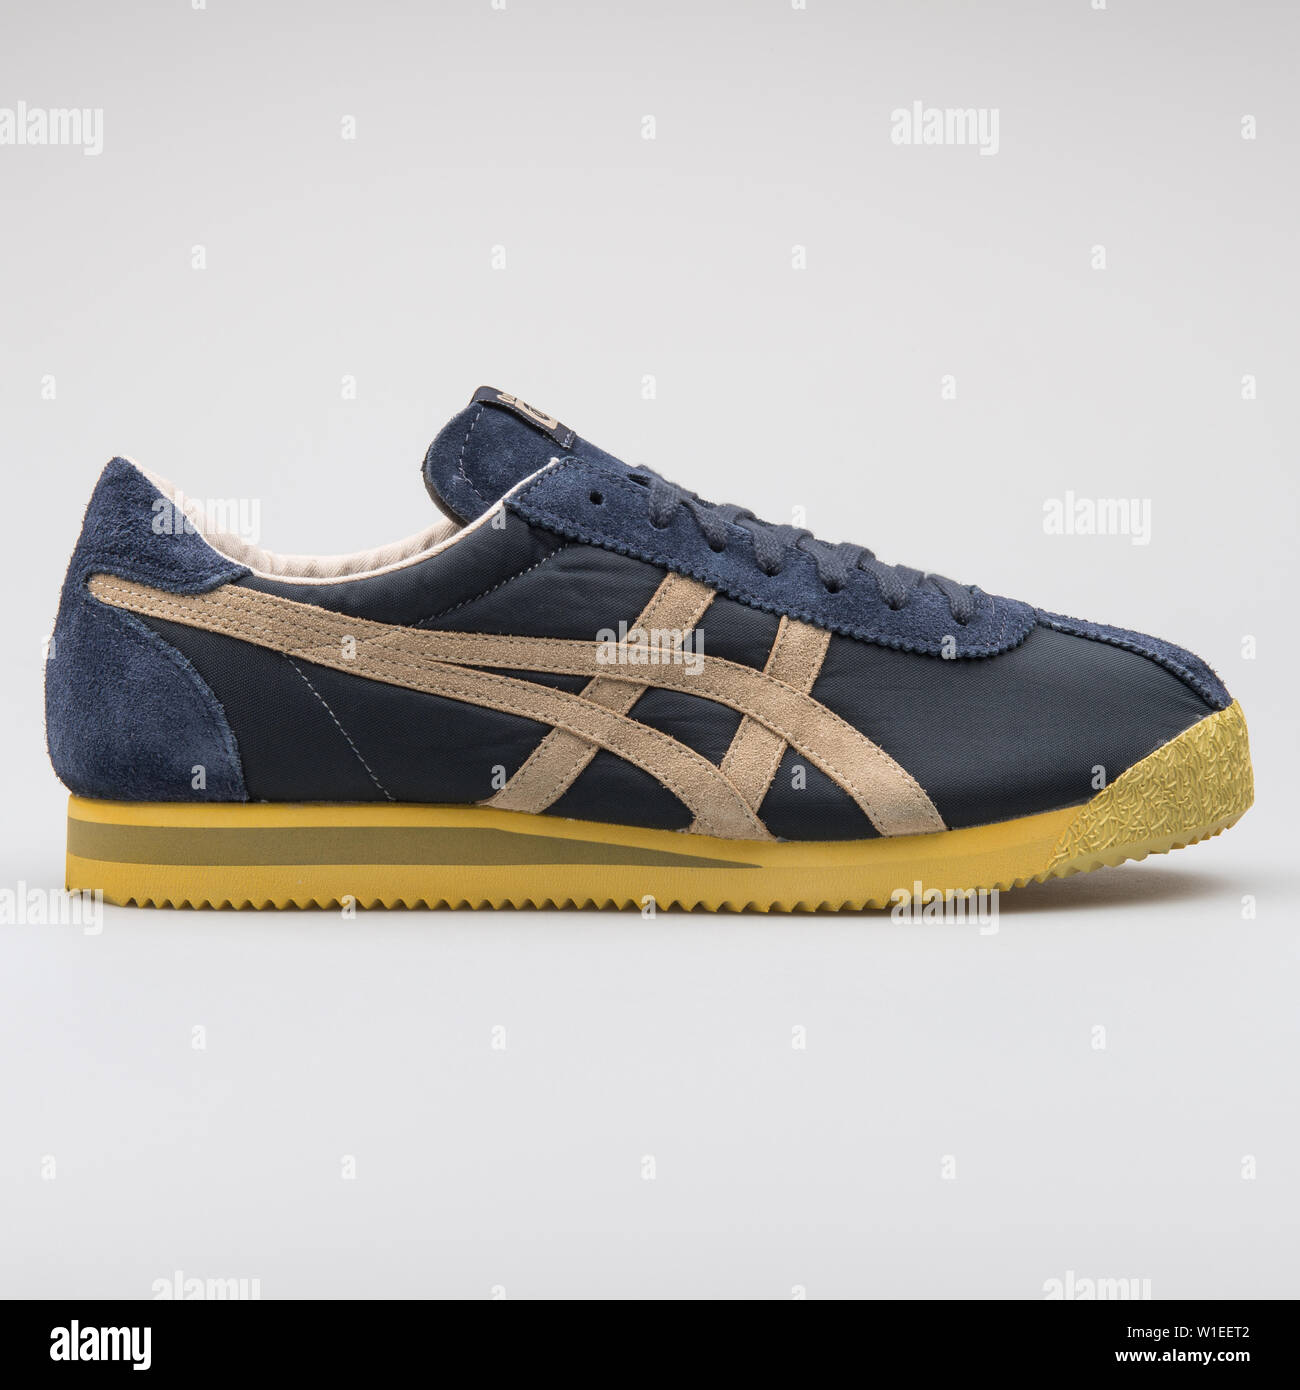 Onitsuka Tiger Corsair White Red Blue Hotsell, 56% OFF | www.dalmar.it